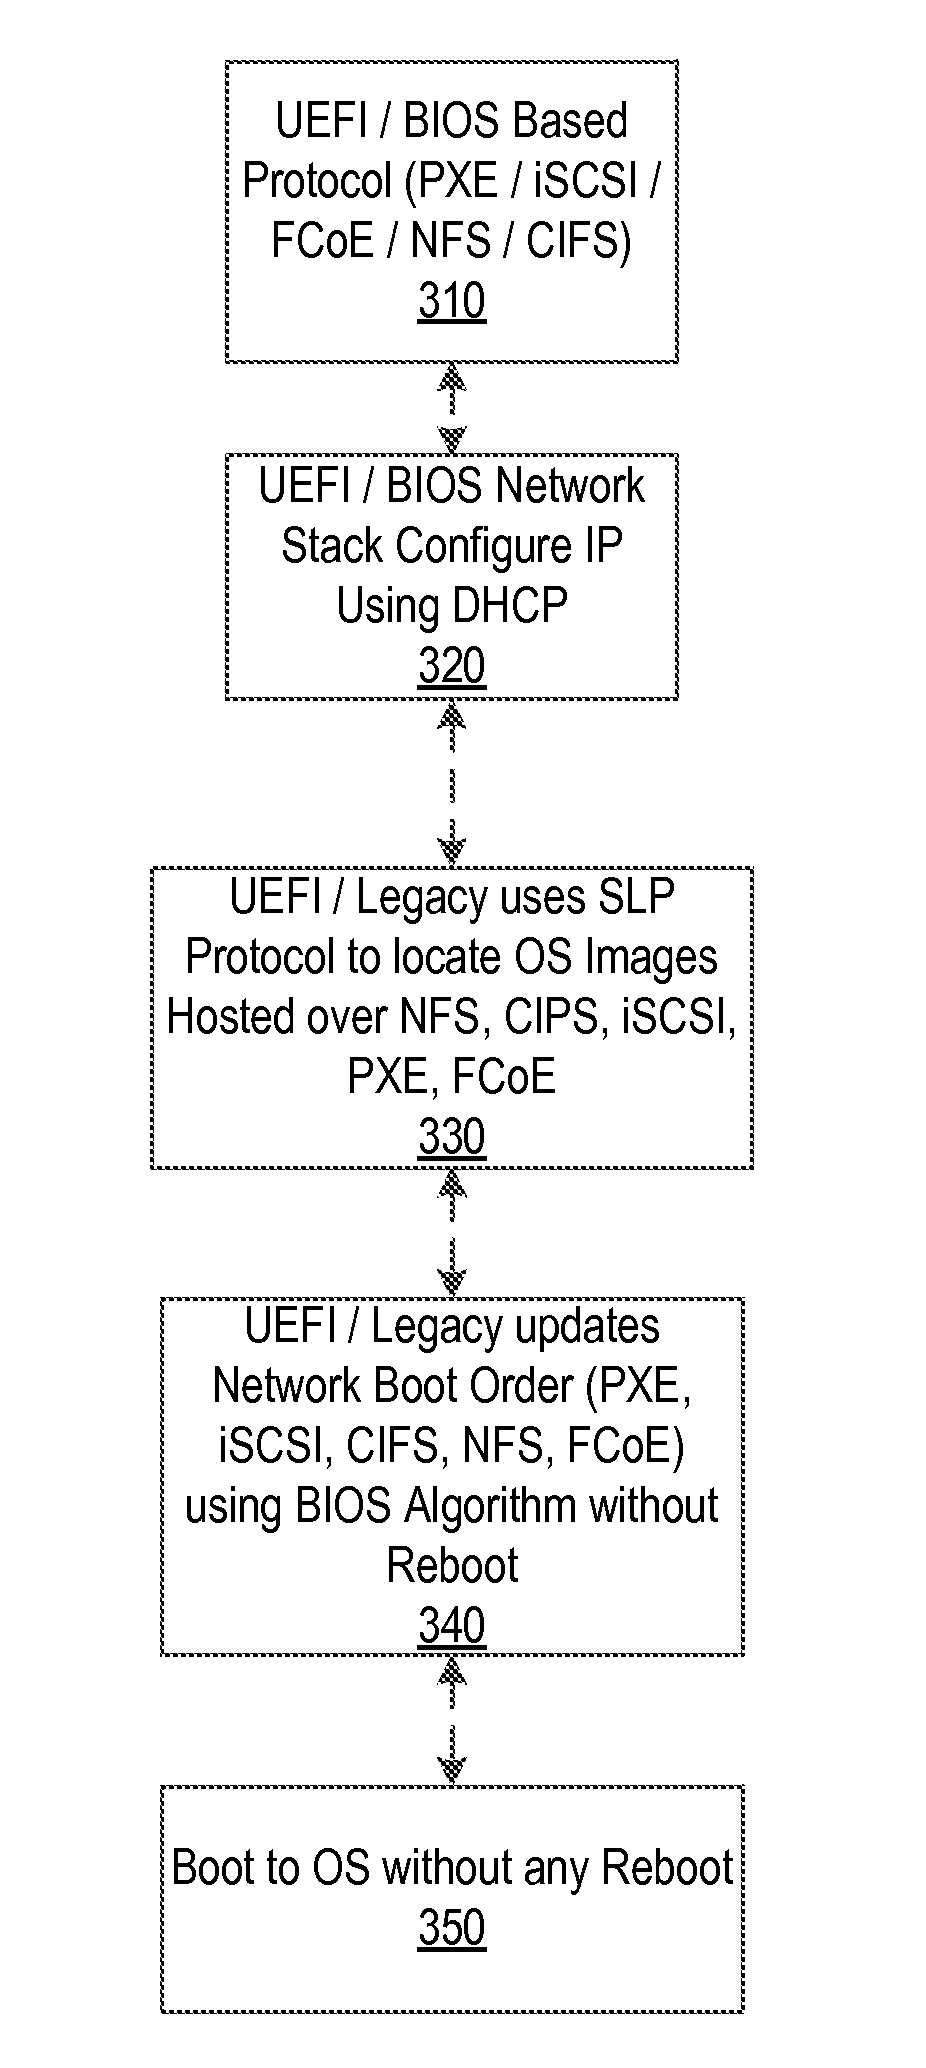 System and Method to Perform an OS Boot Using Service Location Protocol and Launching OS Using a Dynamic Update of Network Boot Order Without a Reboot